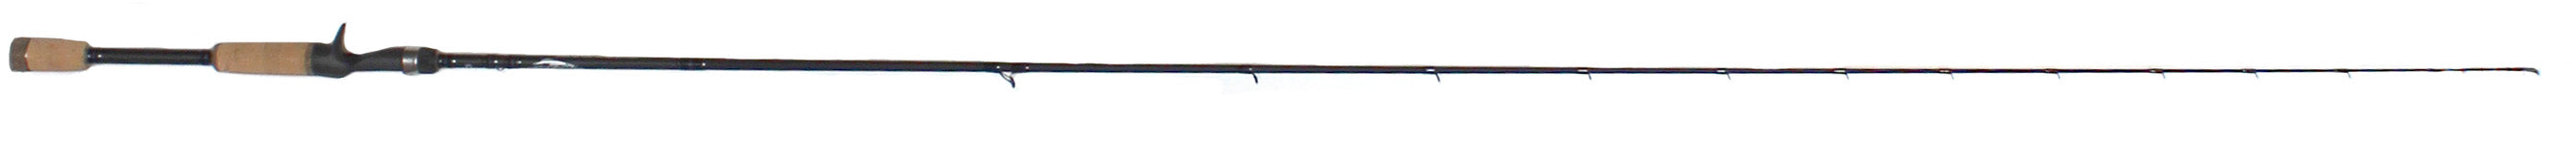 Dobyns Sierra Micro Series Casting Rods